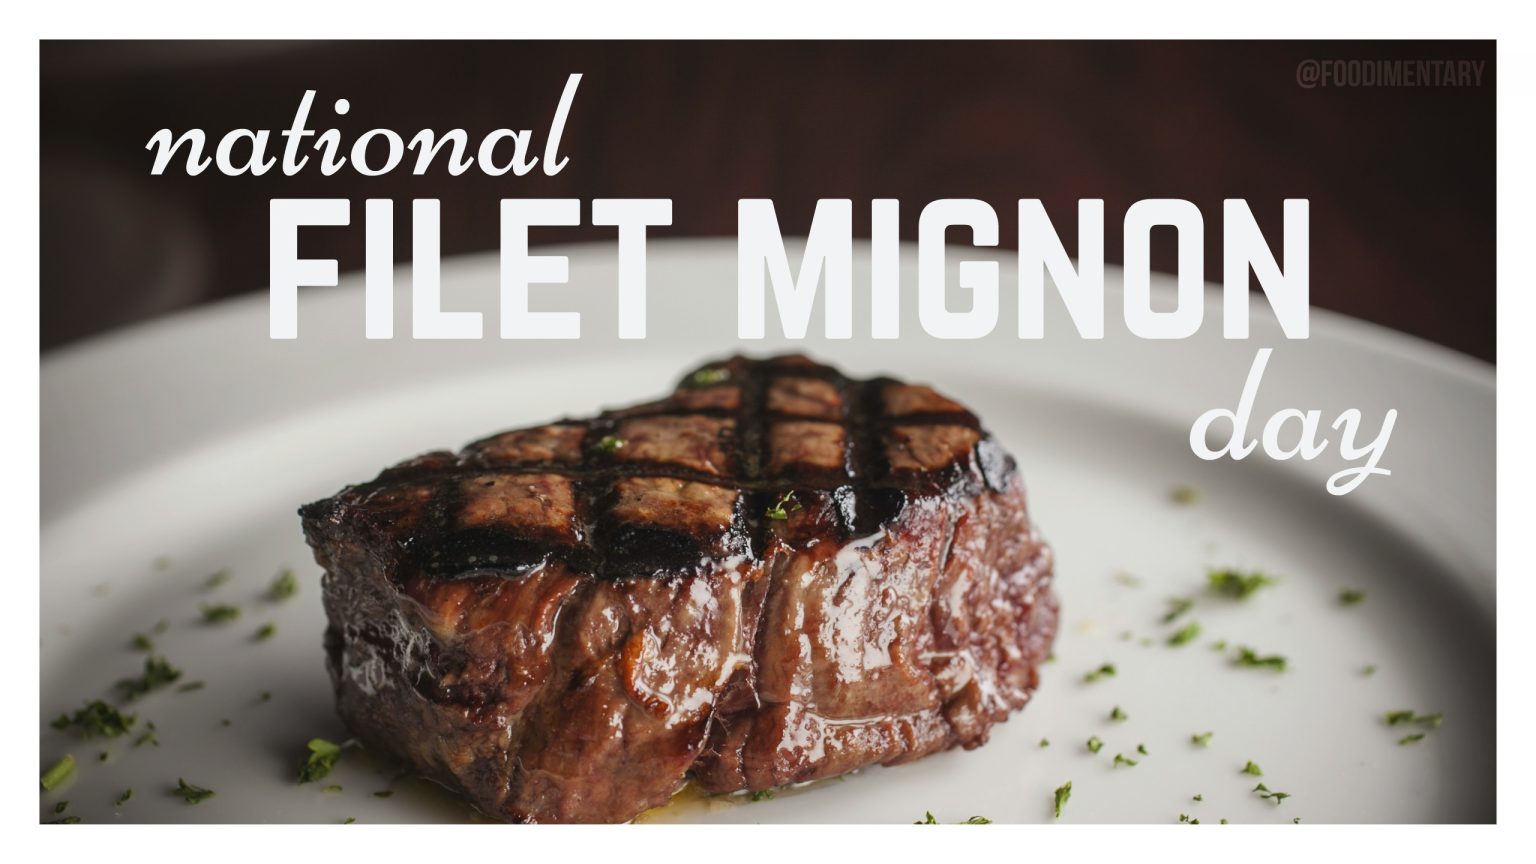 Celebrate National Filet Mignon Day [year] Day Finders